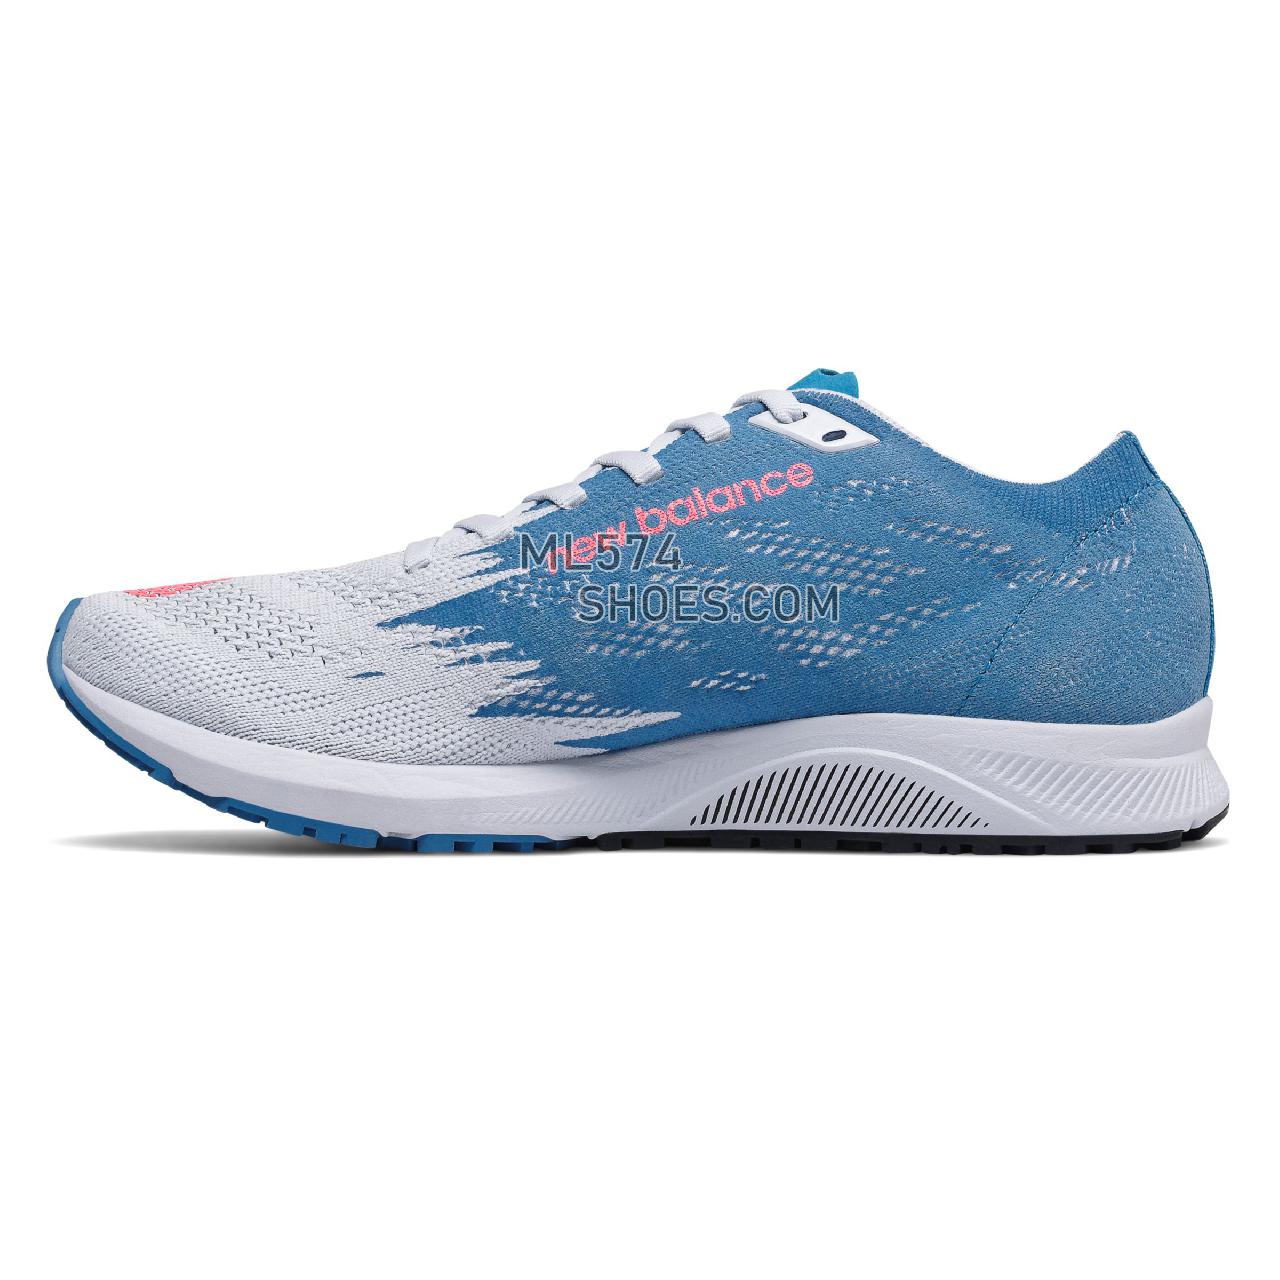 New Balance 1500v6 - Women's Neutral Running - Moon Dust with Vision Blue and Pink - W1500WB6